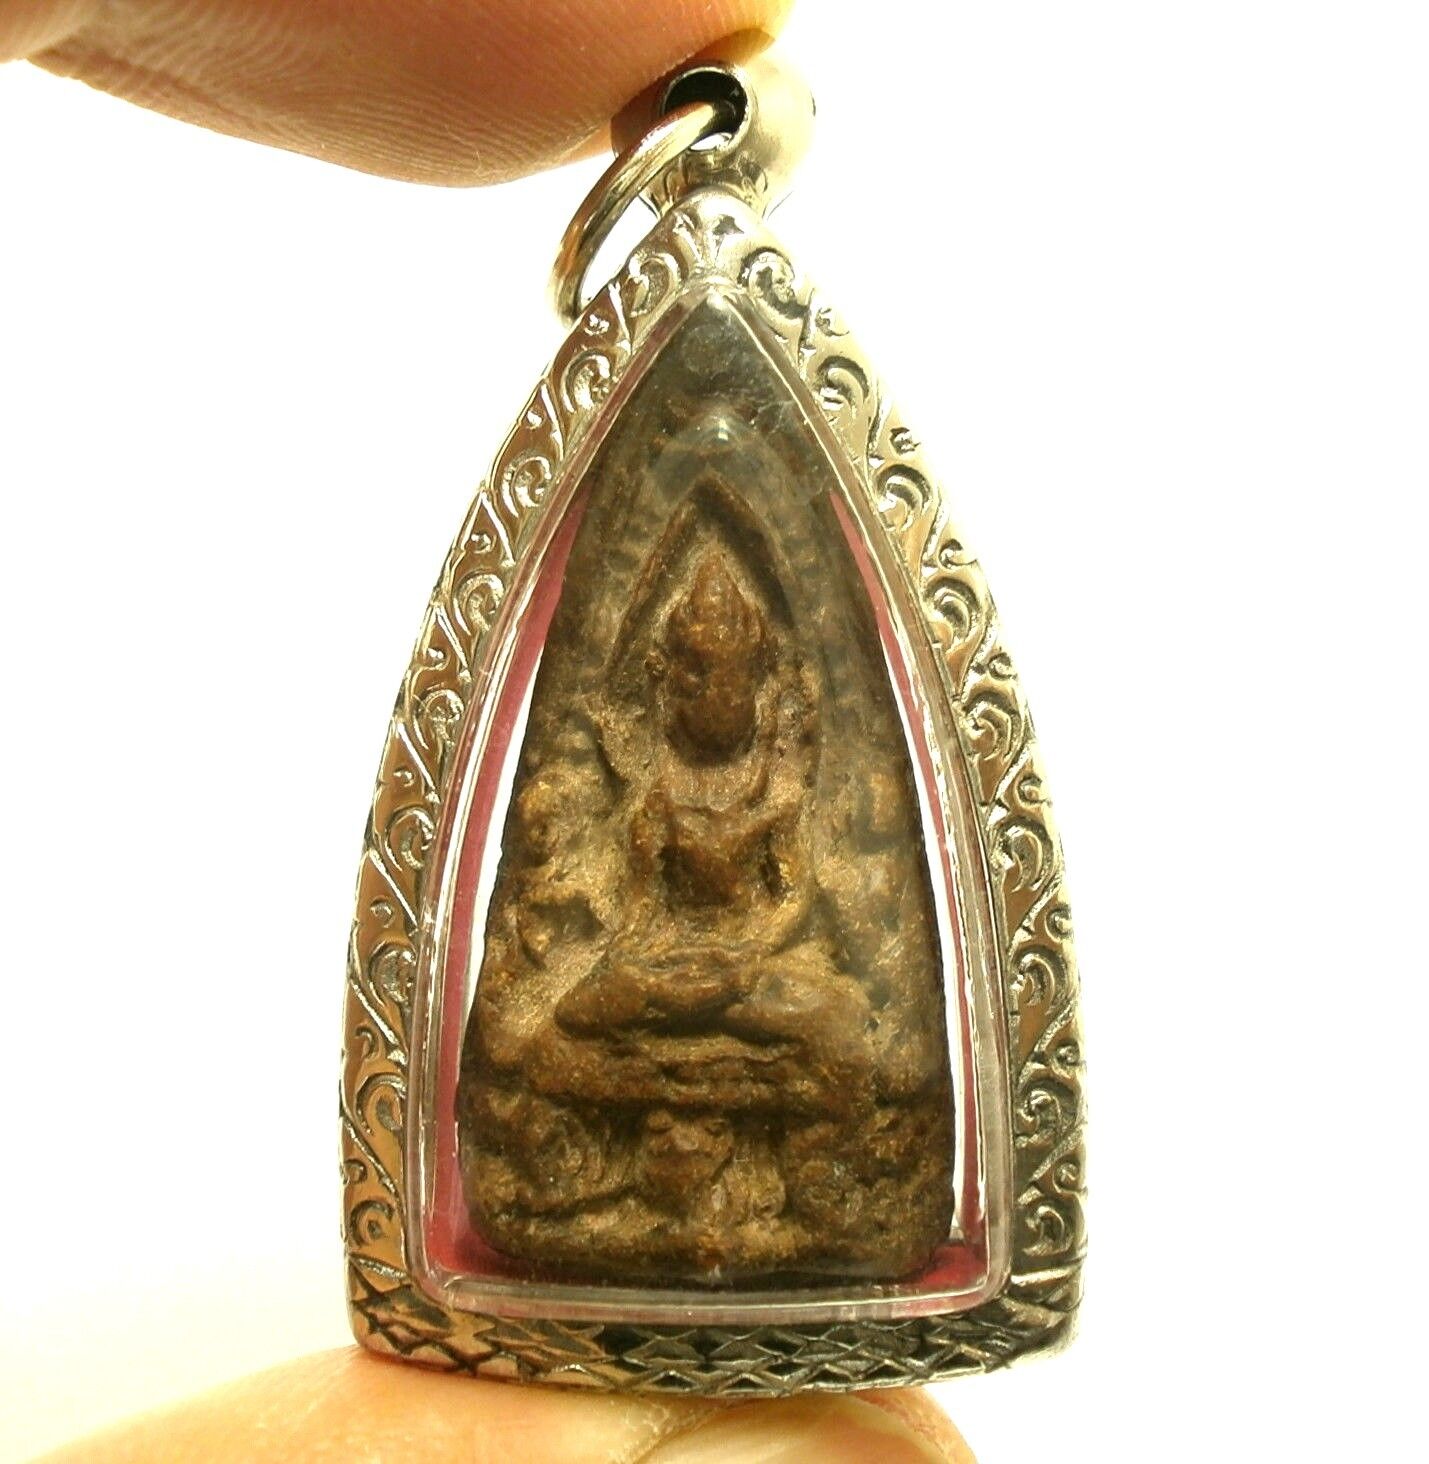 PHRA LIANG REAL ANTIQUE LORD BUDDHA AMULET LUCKY RICH PEACEFUL SAFE LIFE PENDANT